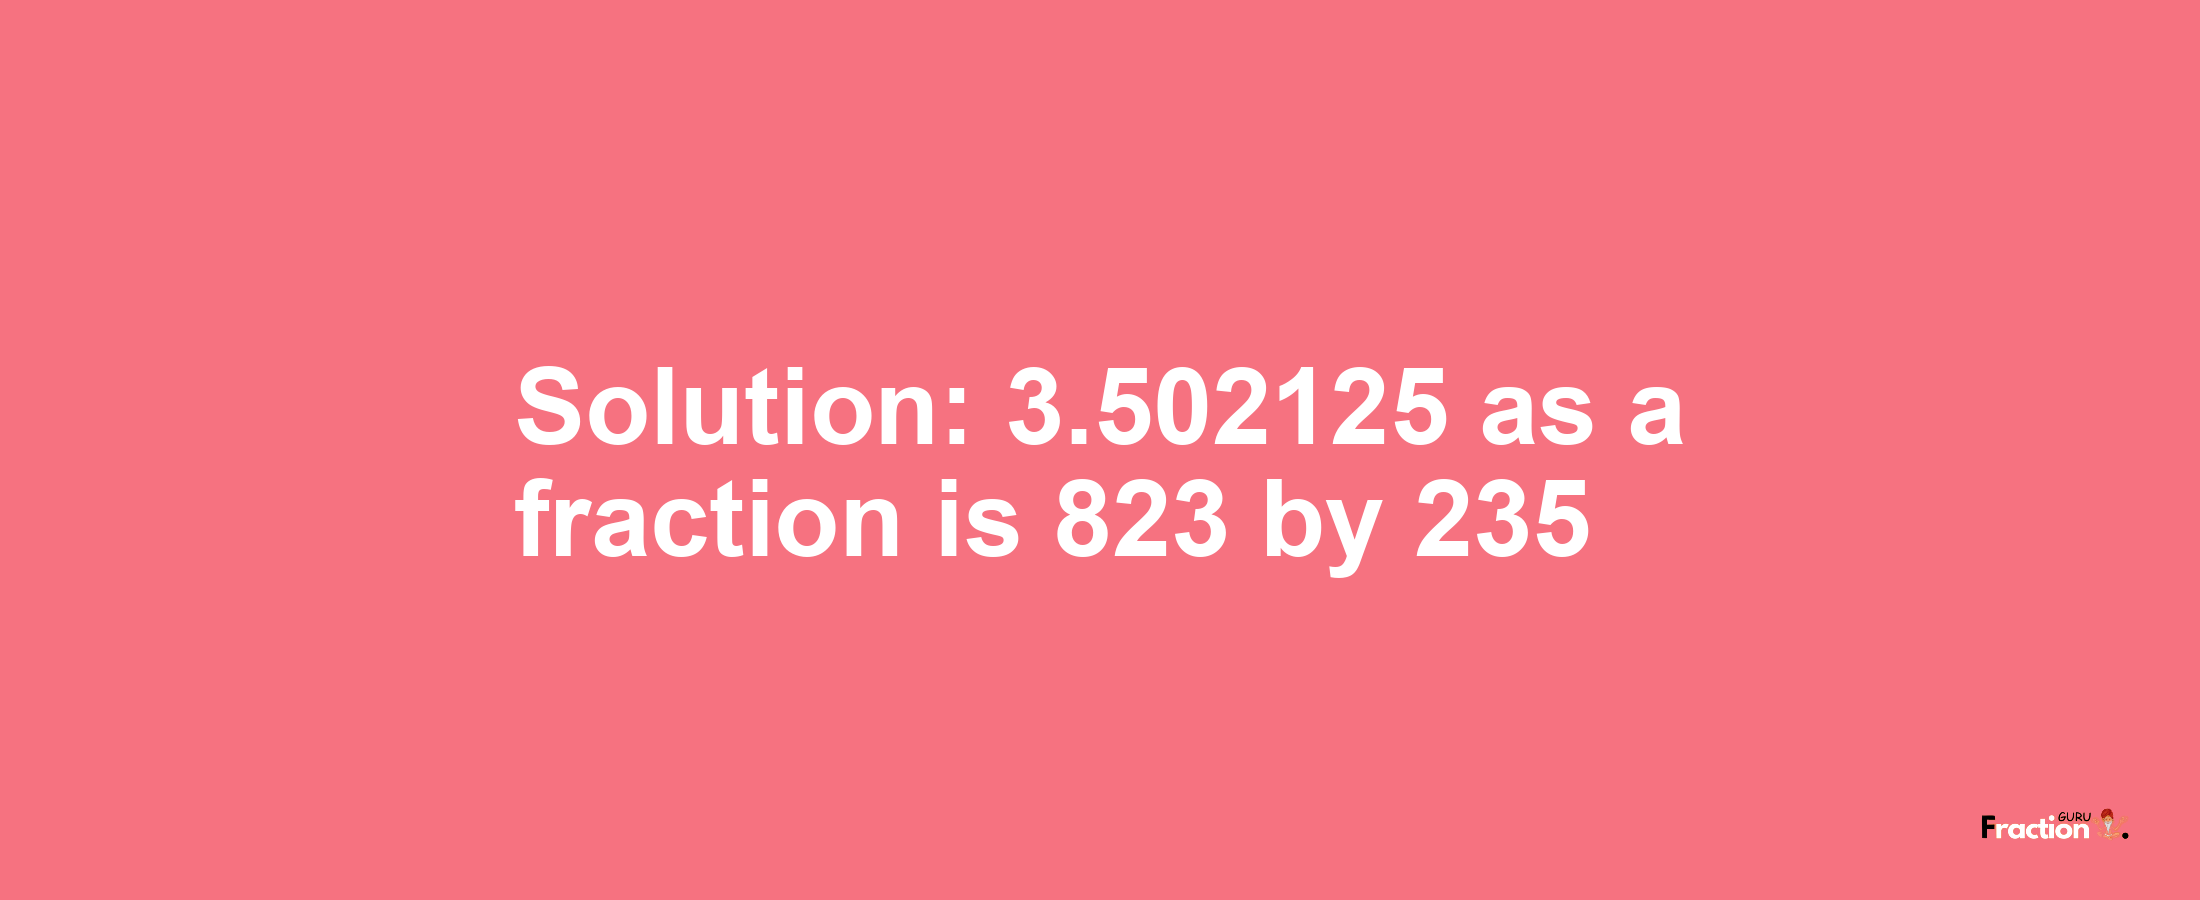 Solution:3.502125 as a fraction is 823/235